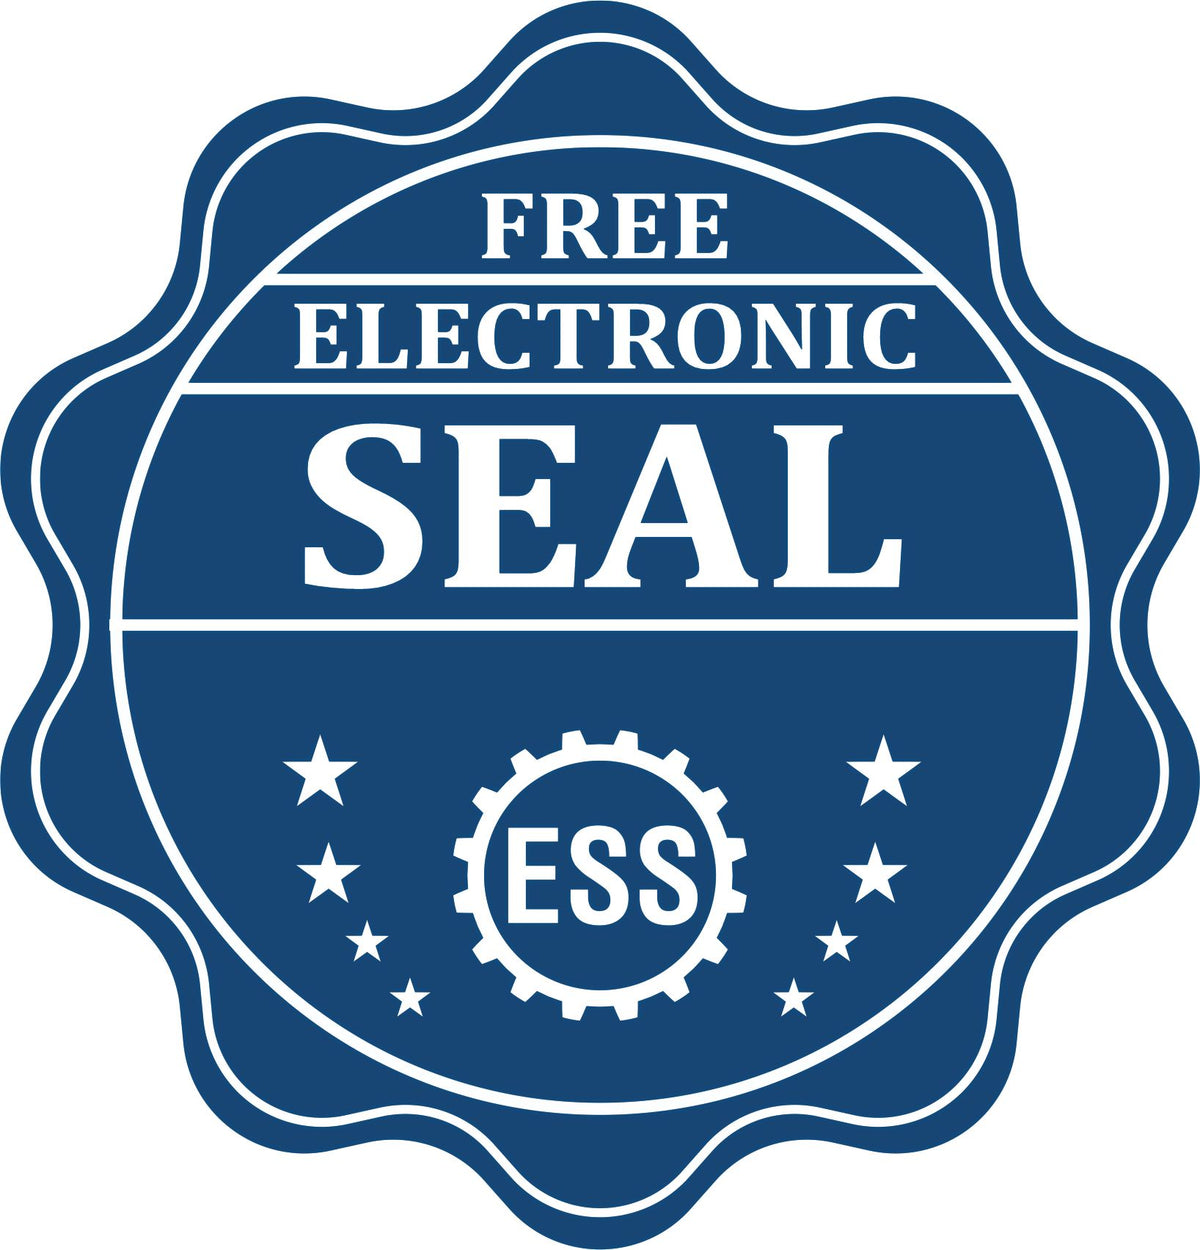 A badge showing a free electronic seal for the Super Slim Wyoming Notary Public Stamp with stars and the ESS gear on the emblem.